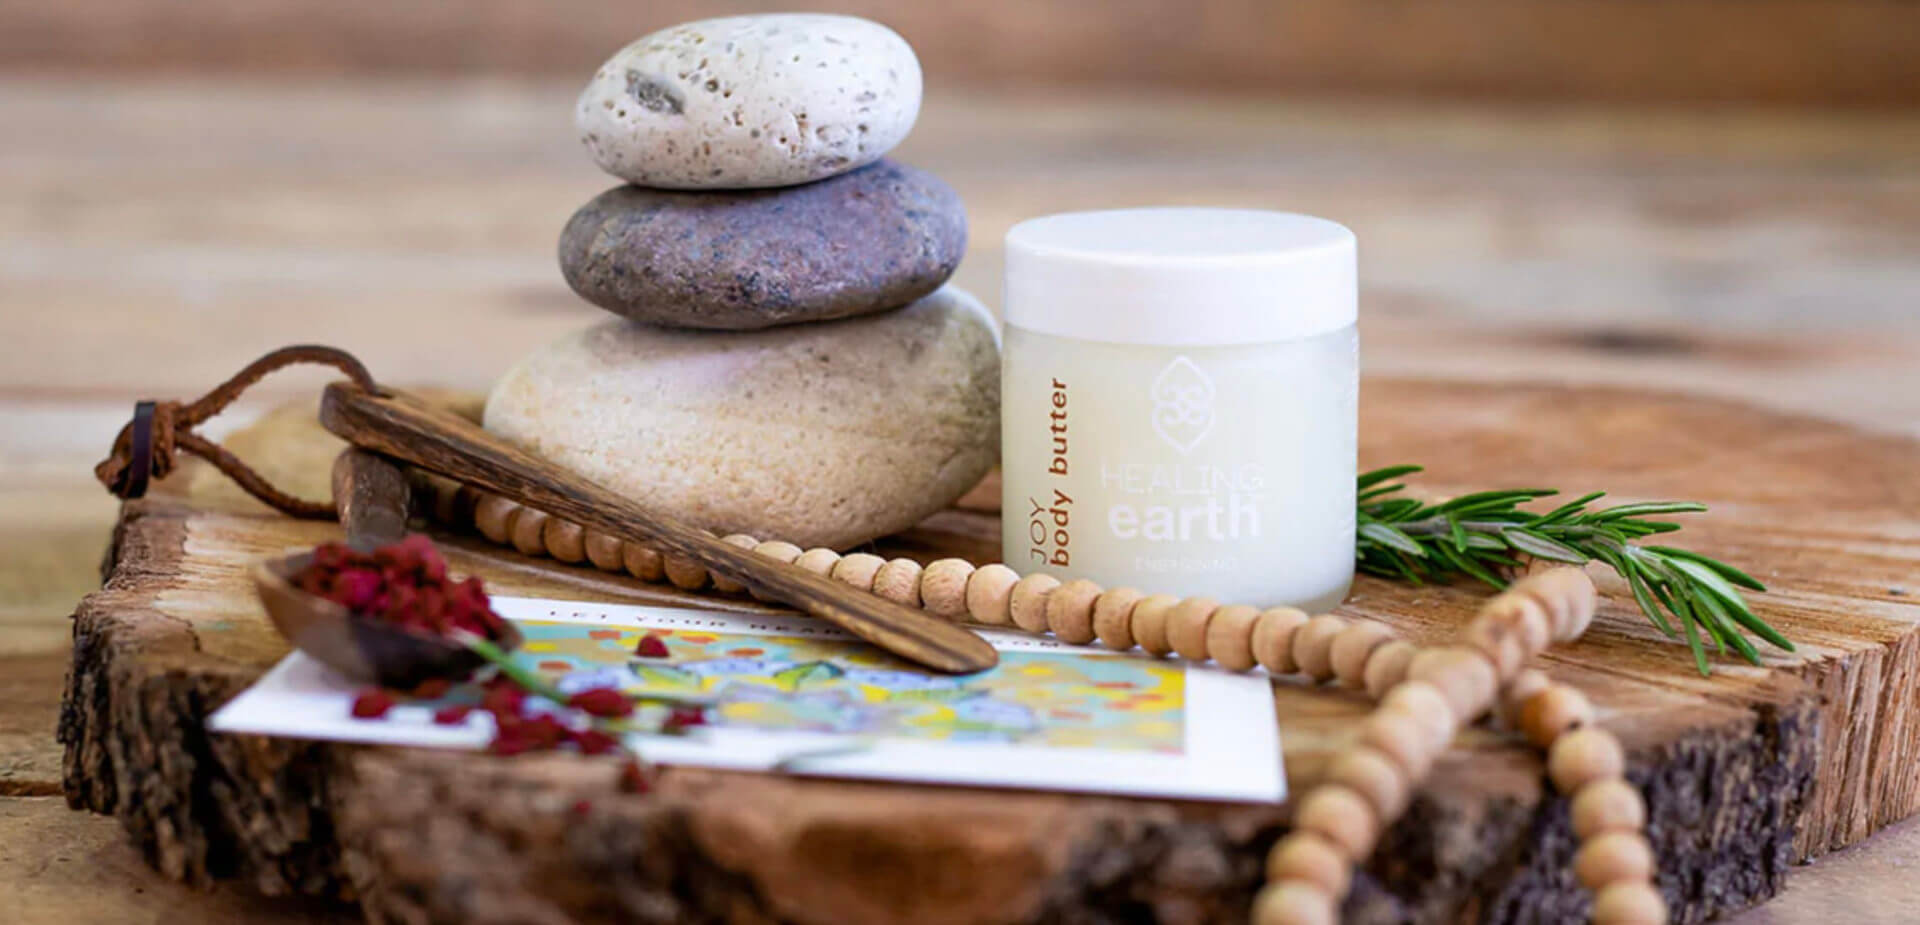 LUXURIA LIFESTYLE INTERNATIONAL WELCOMES LUXURY AFRICAN SKINCARE BRAND HEALING EARTH